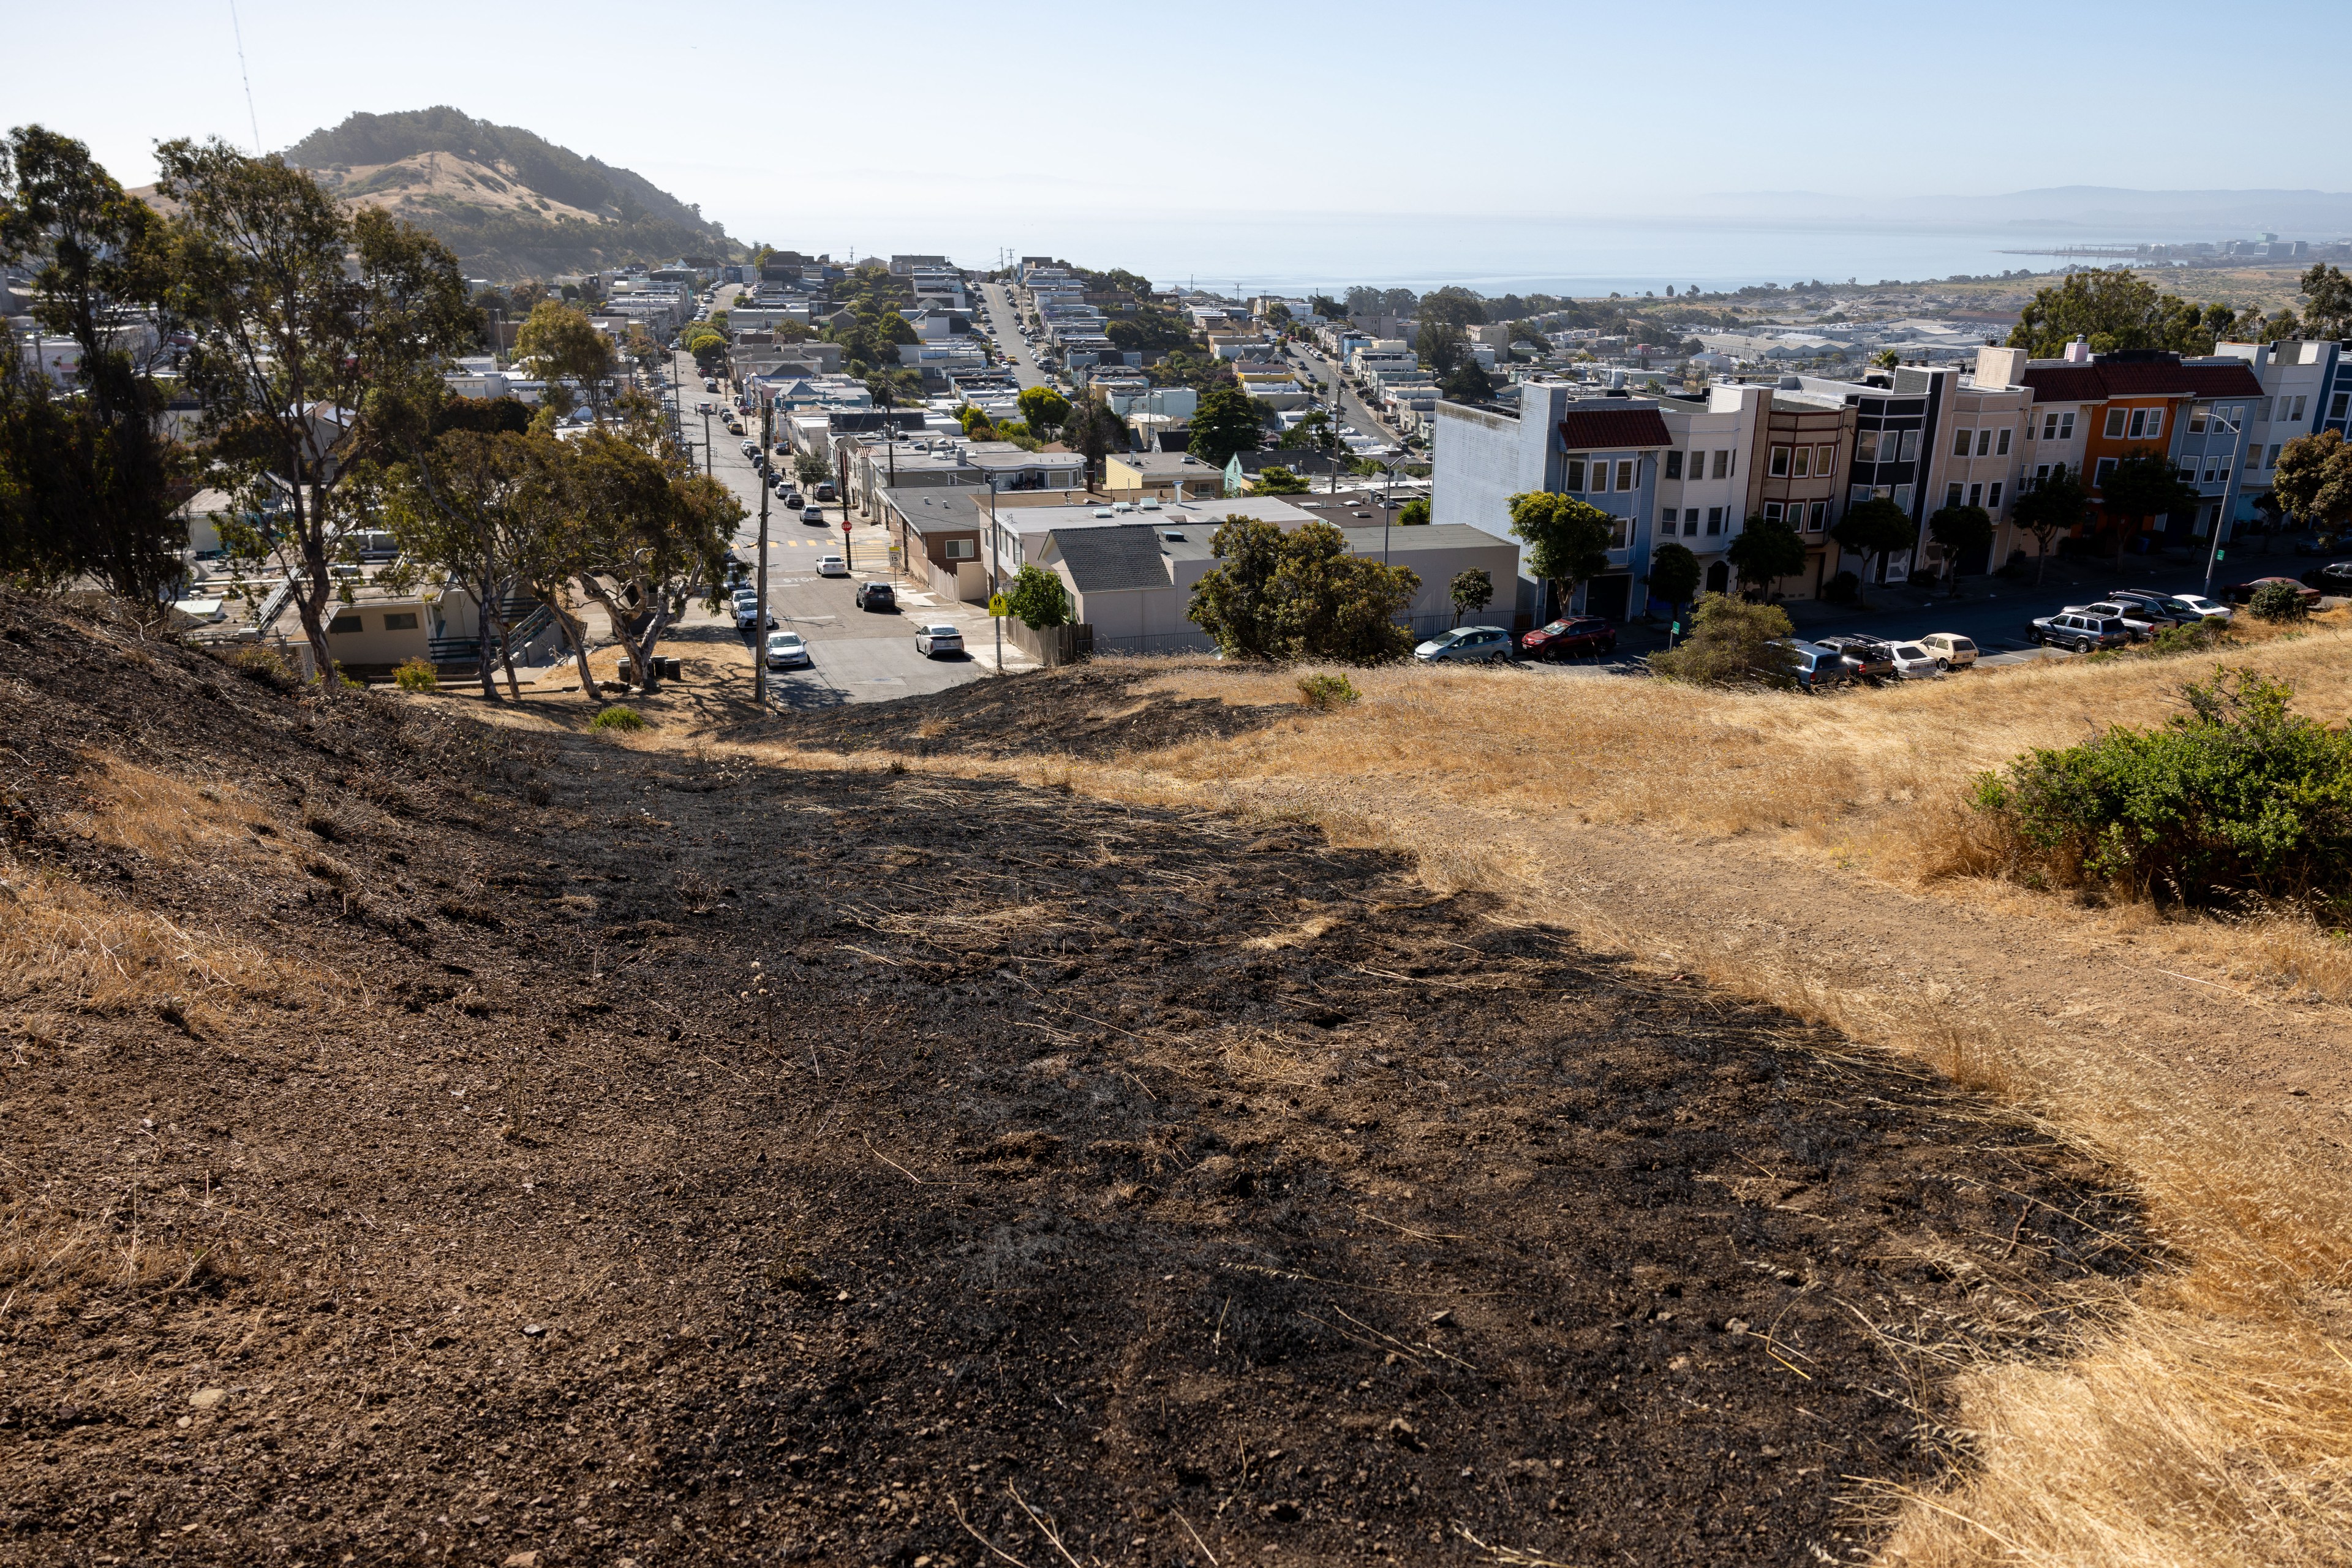 The image shows a hillside with dry grass and patches of charred ground, leading down to a suburban area with houses, trees, and distant views of water and mountains.